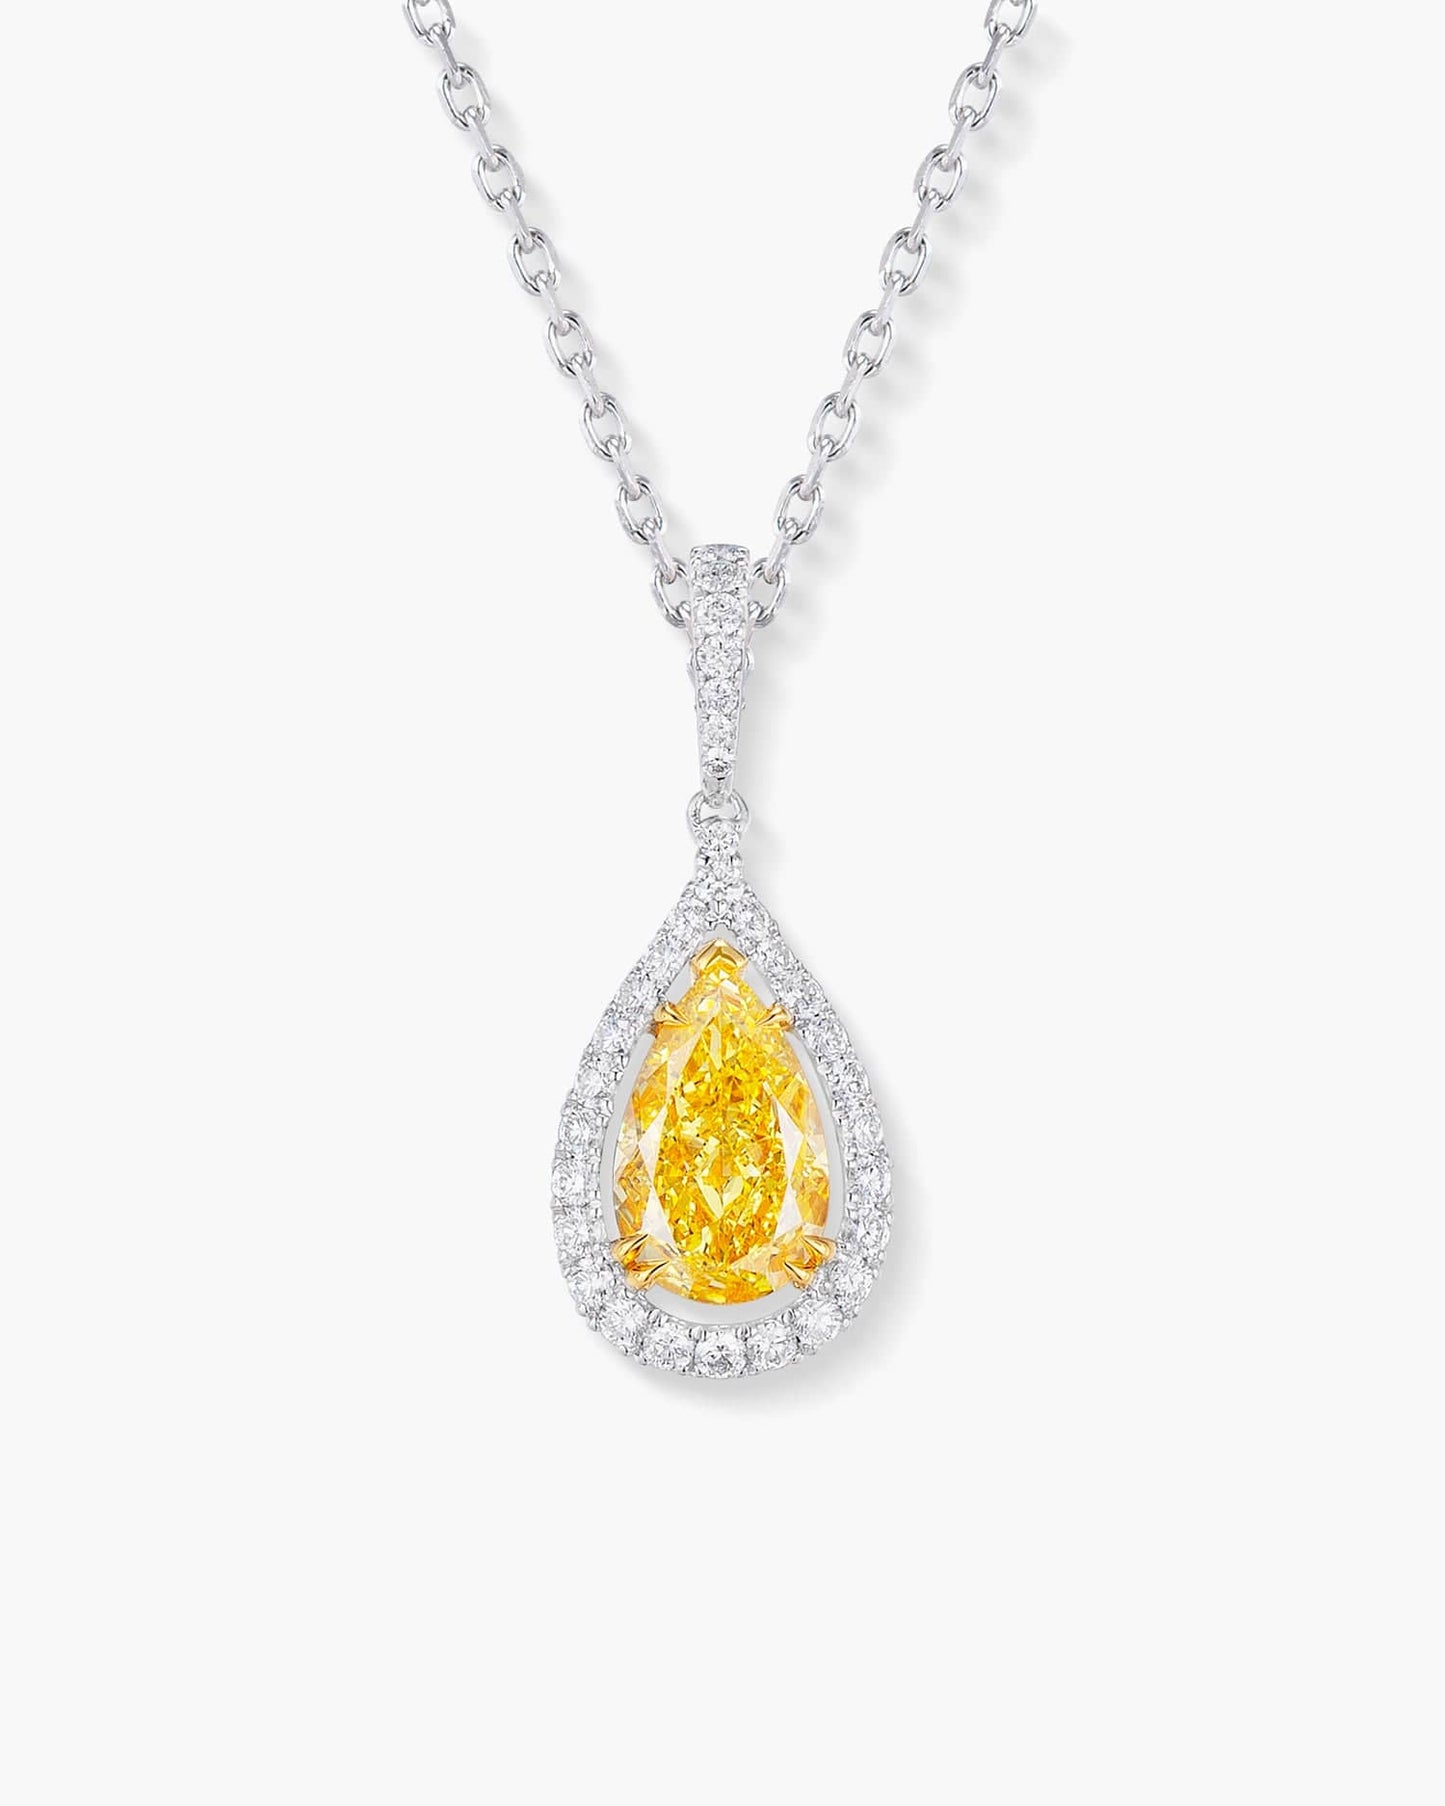 1.24 carat Pear Shape Yellow and White Diamond Pendant Necklace